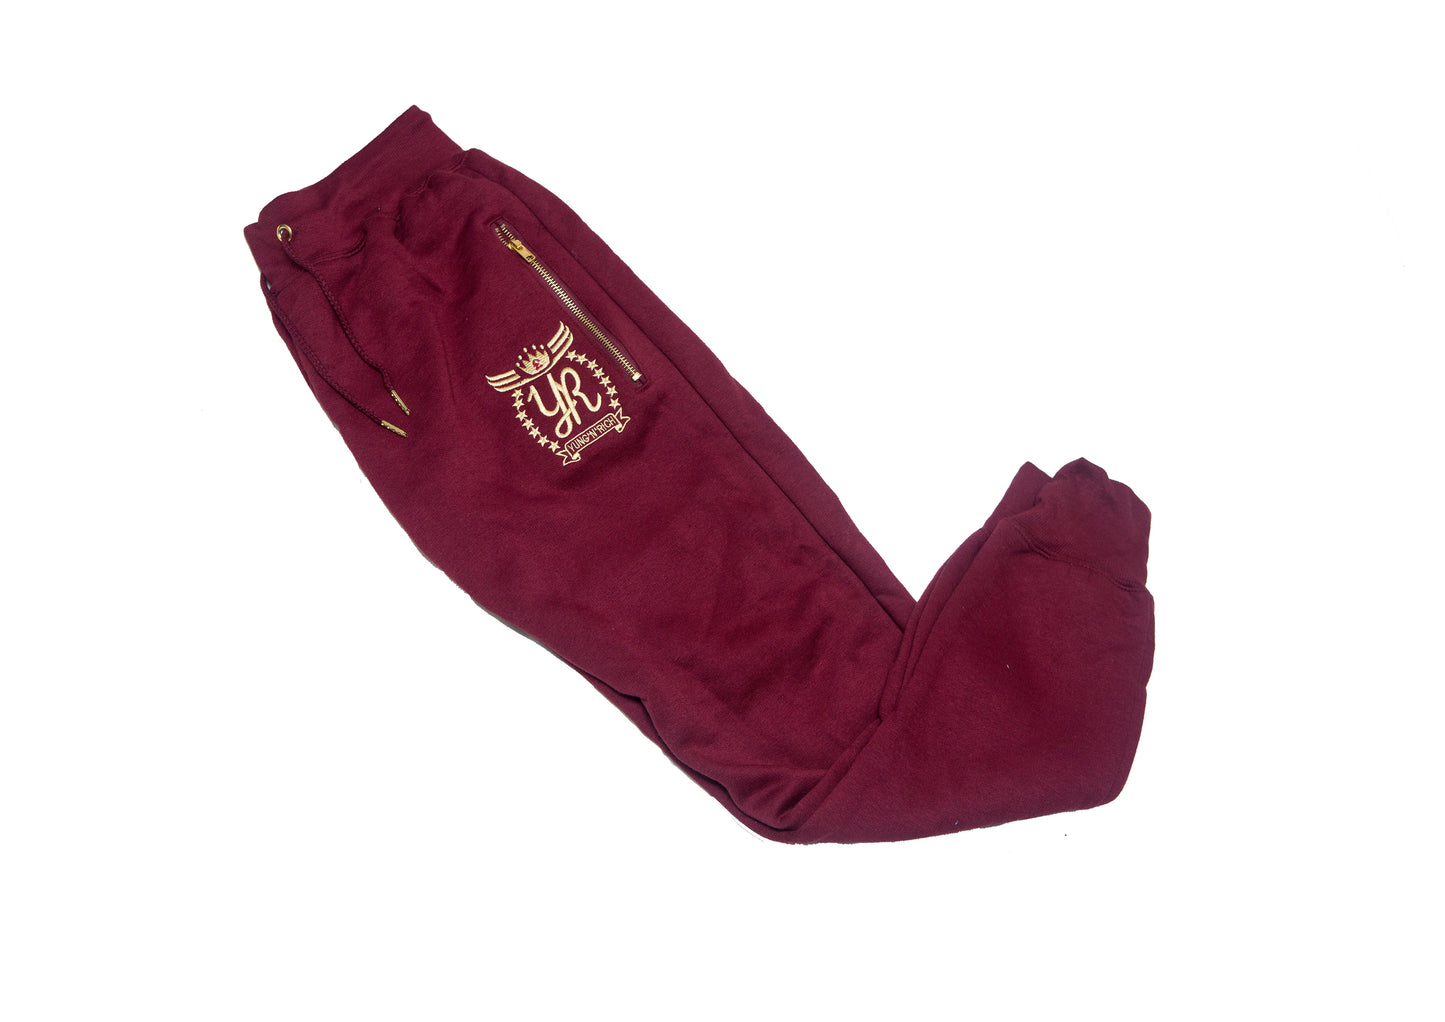 YUNG'N'RICH | GOLD EDITION BURGUNDY WOMENS TRACKSUIT BOTTOMS